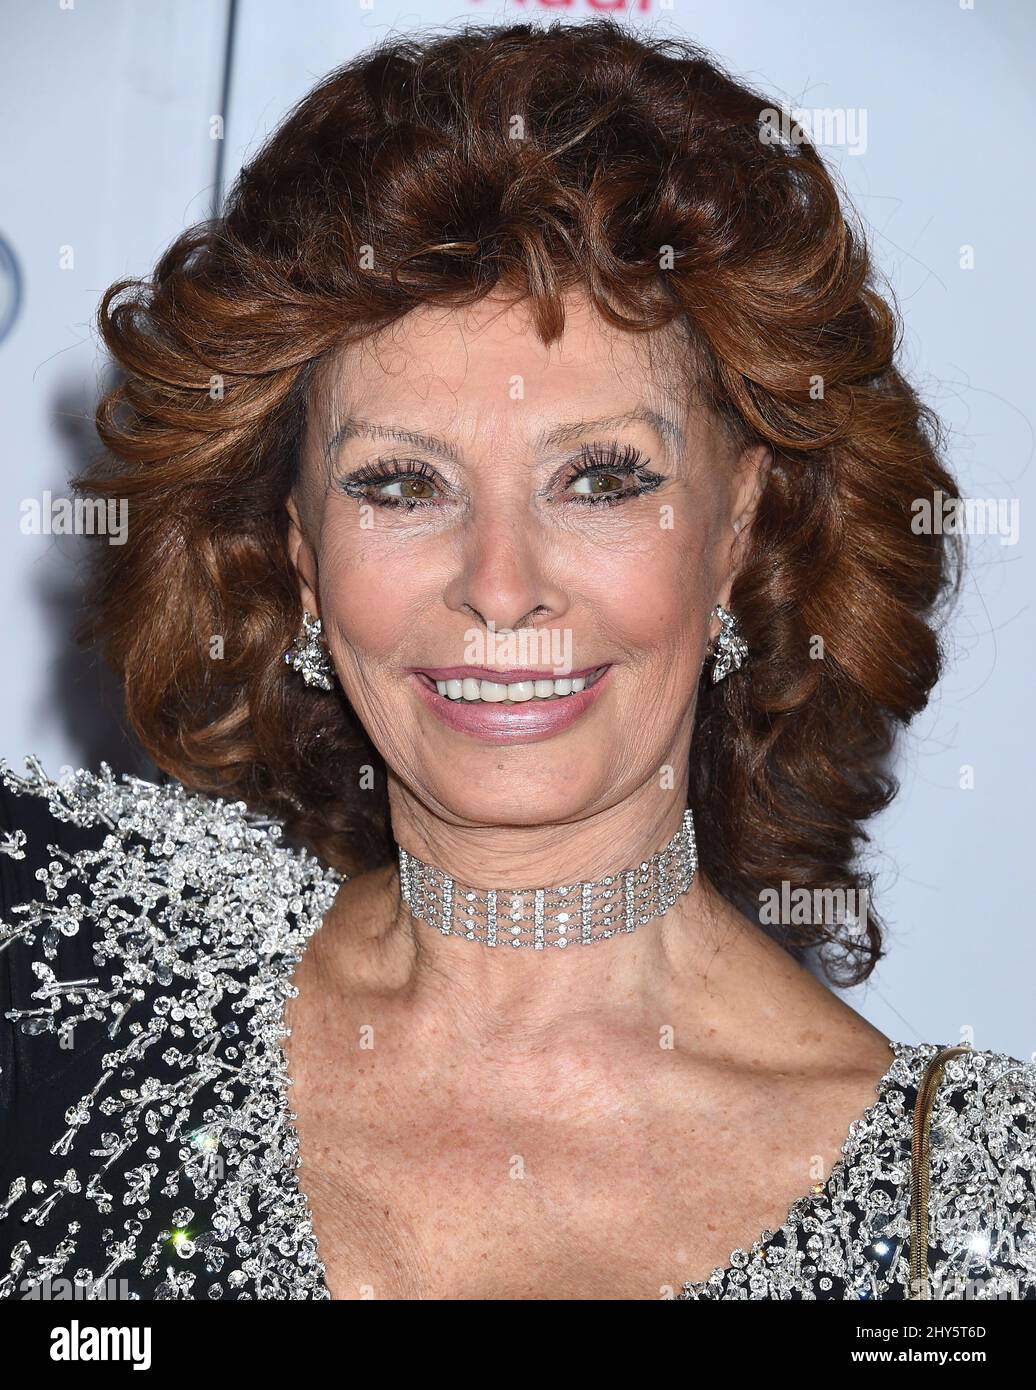 Actress Sofia Loren attends the special tribute to her during the AFI FEST 2014 at Dolby Theatre on Wednesday, Nov. 12, 2014 in Hollywood, CA. Stock Photo